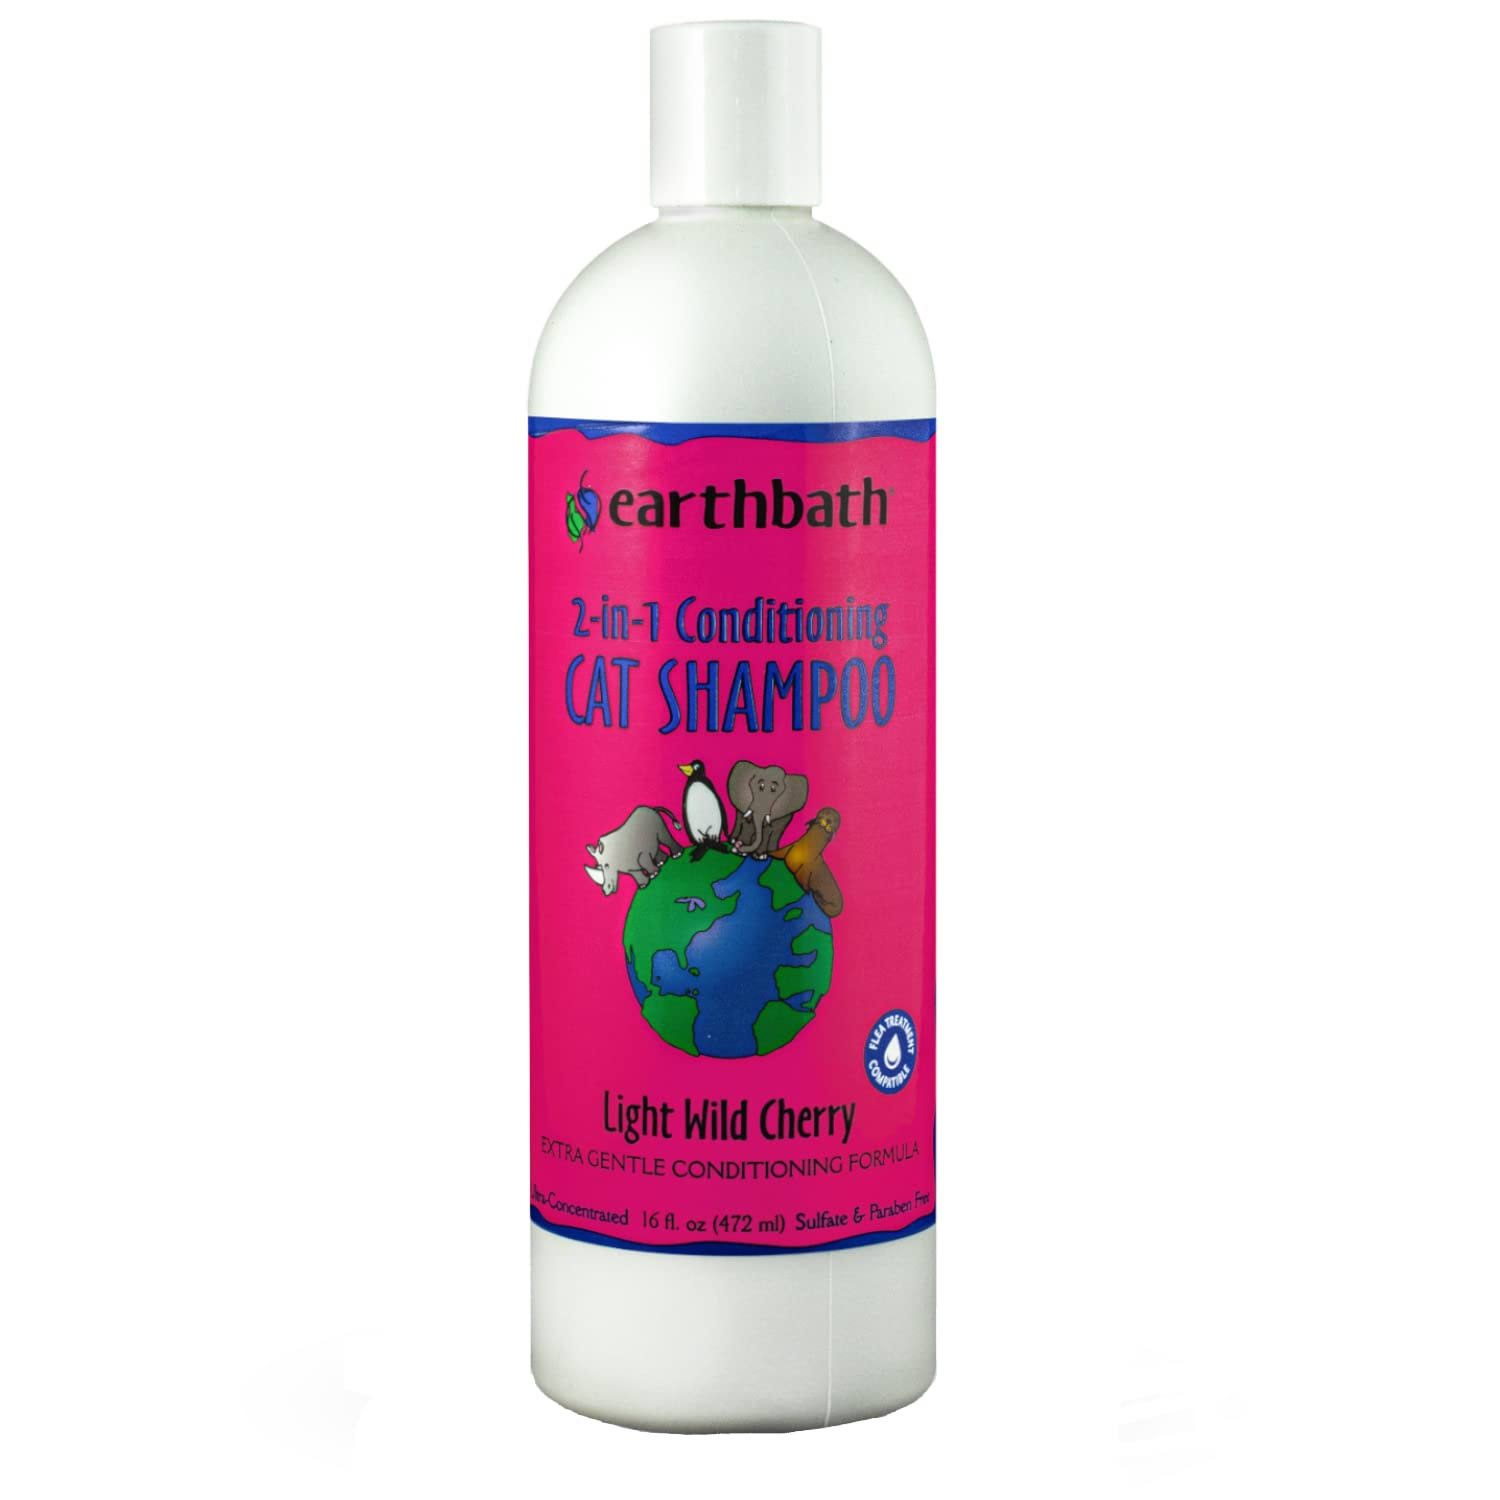 Earthbath All Natural Cat Shampoo and Conditioner in 1 - 16oz